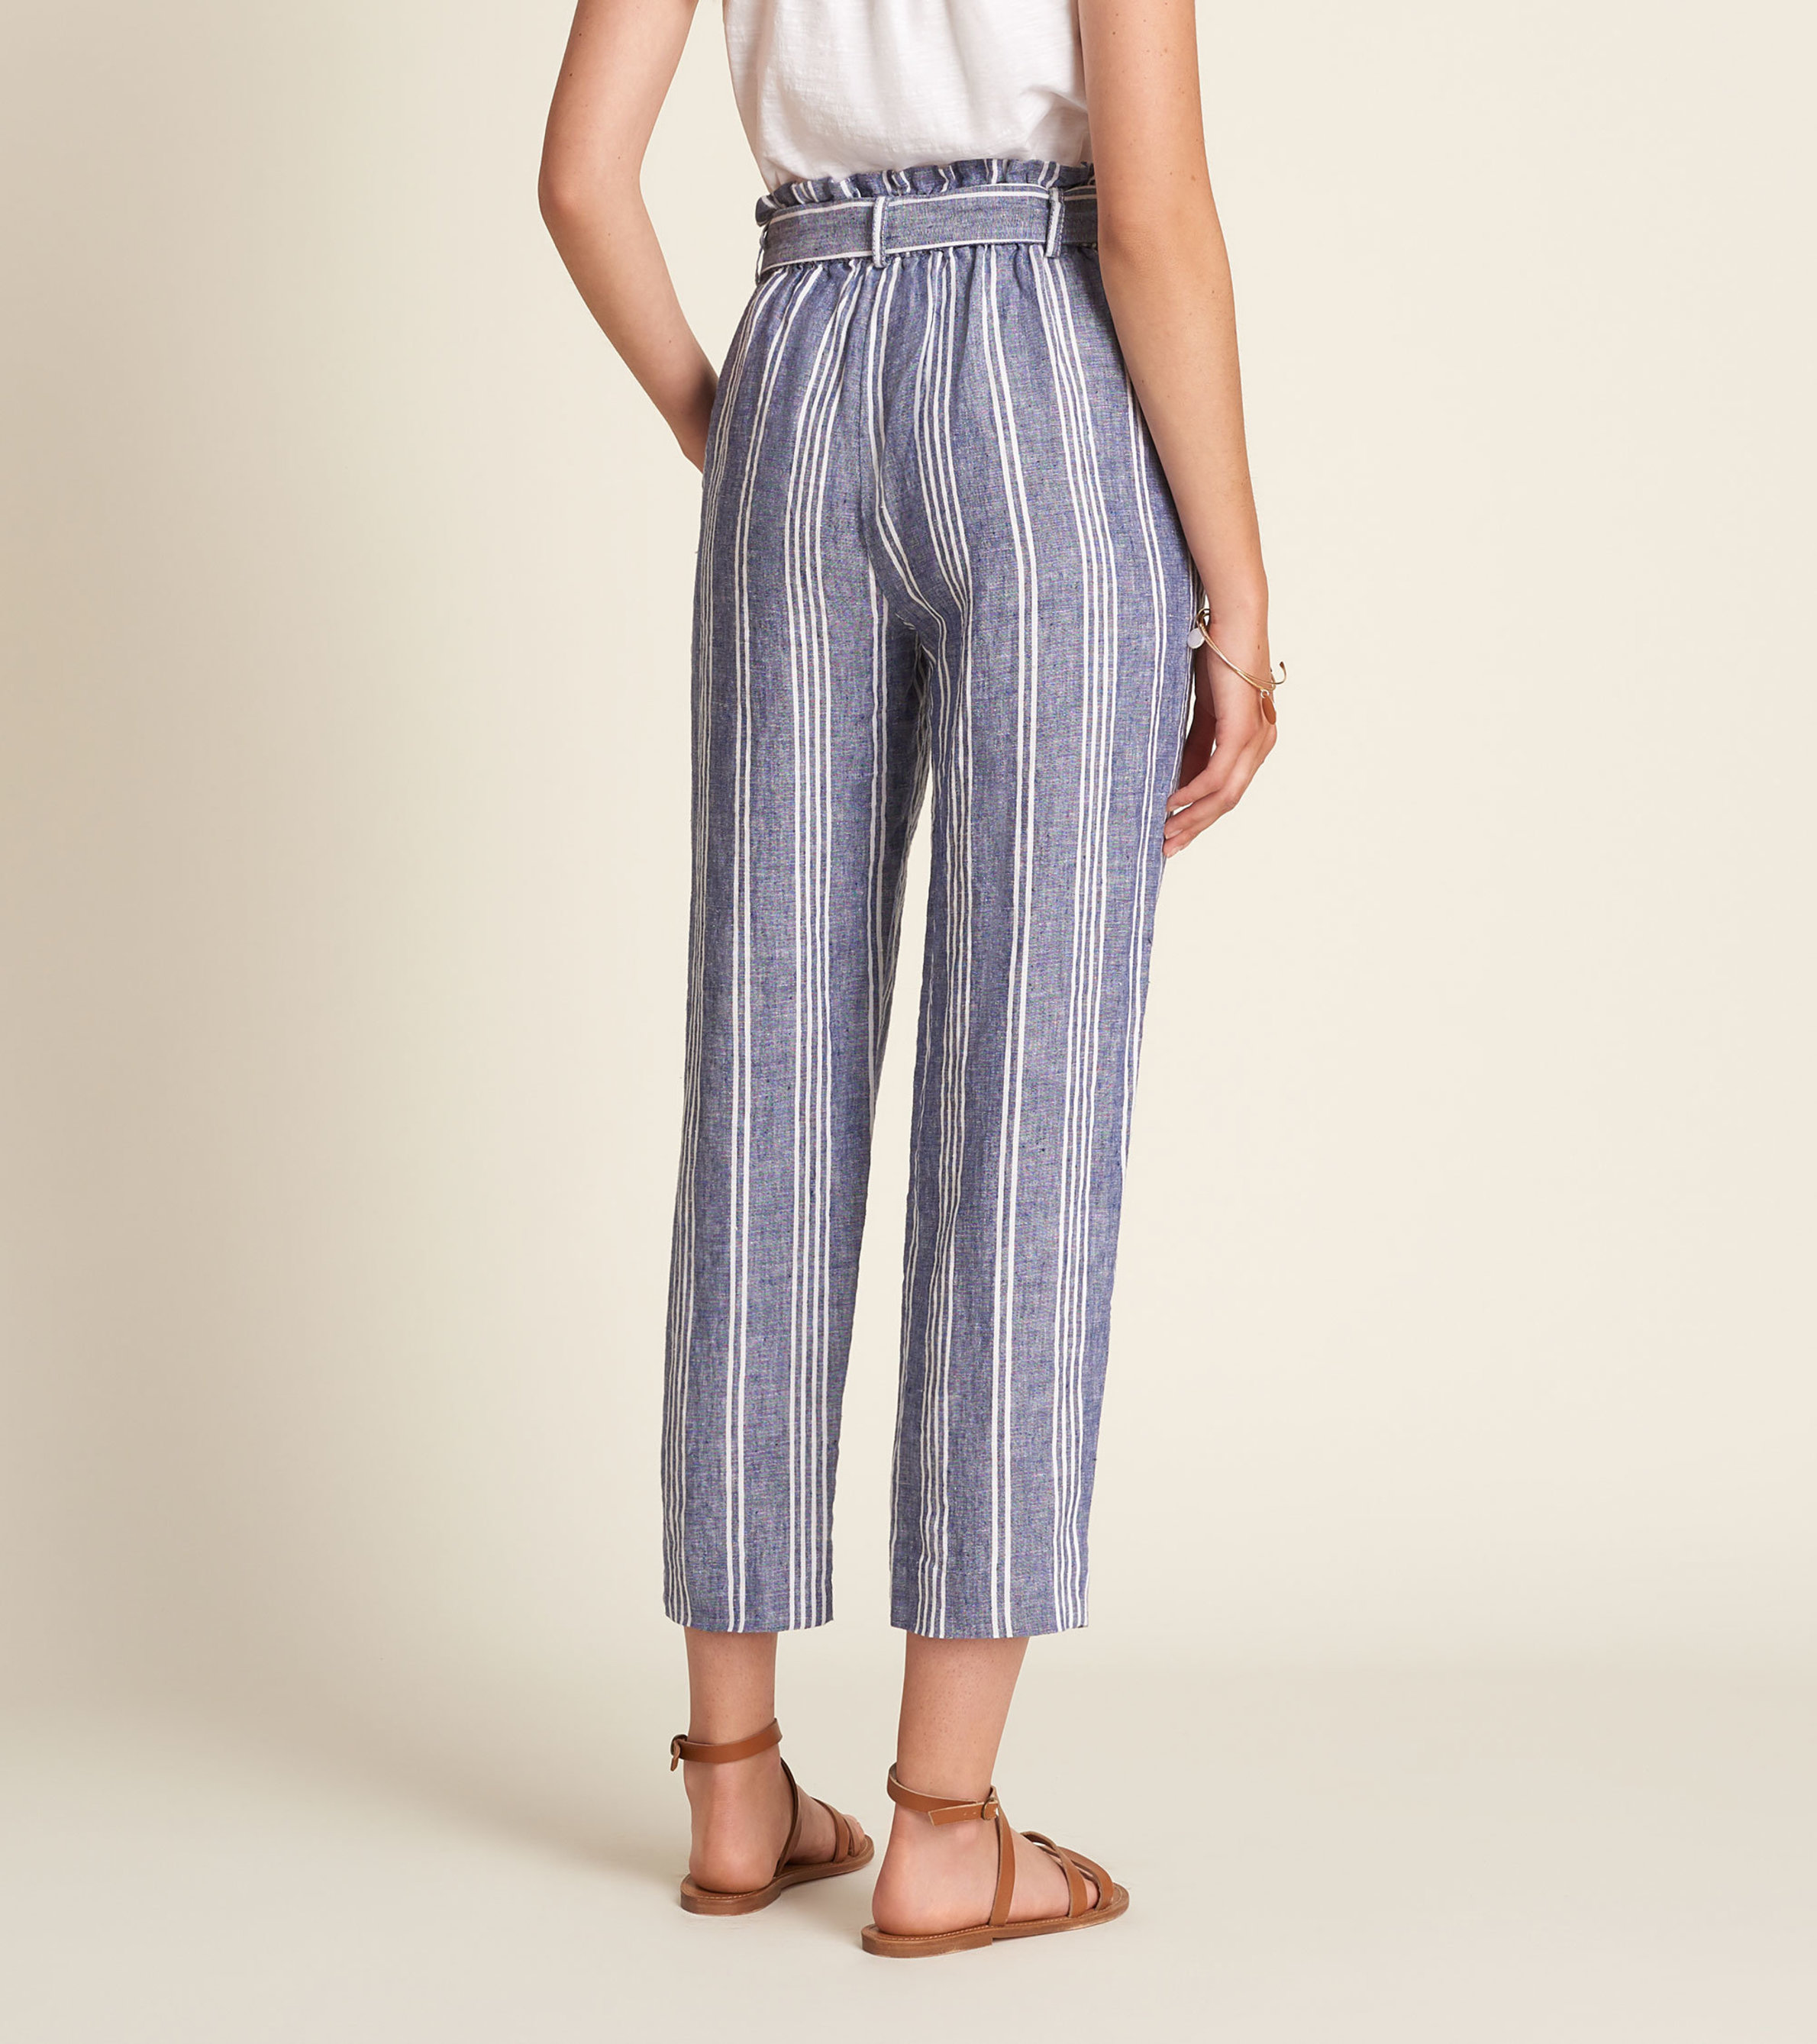 Striped Paper Bag High Waist Pants SPA349B  Style State